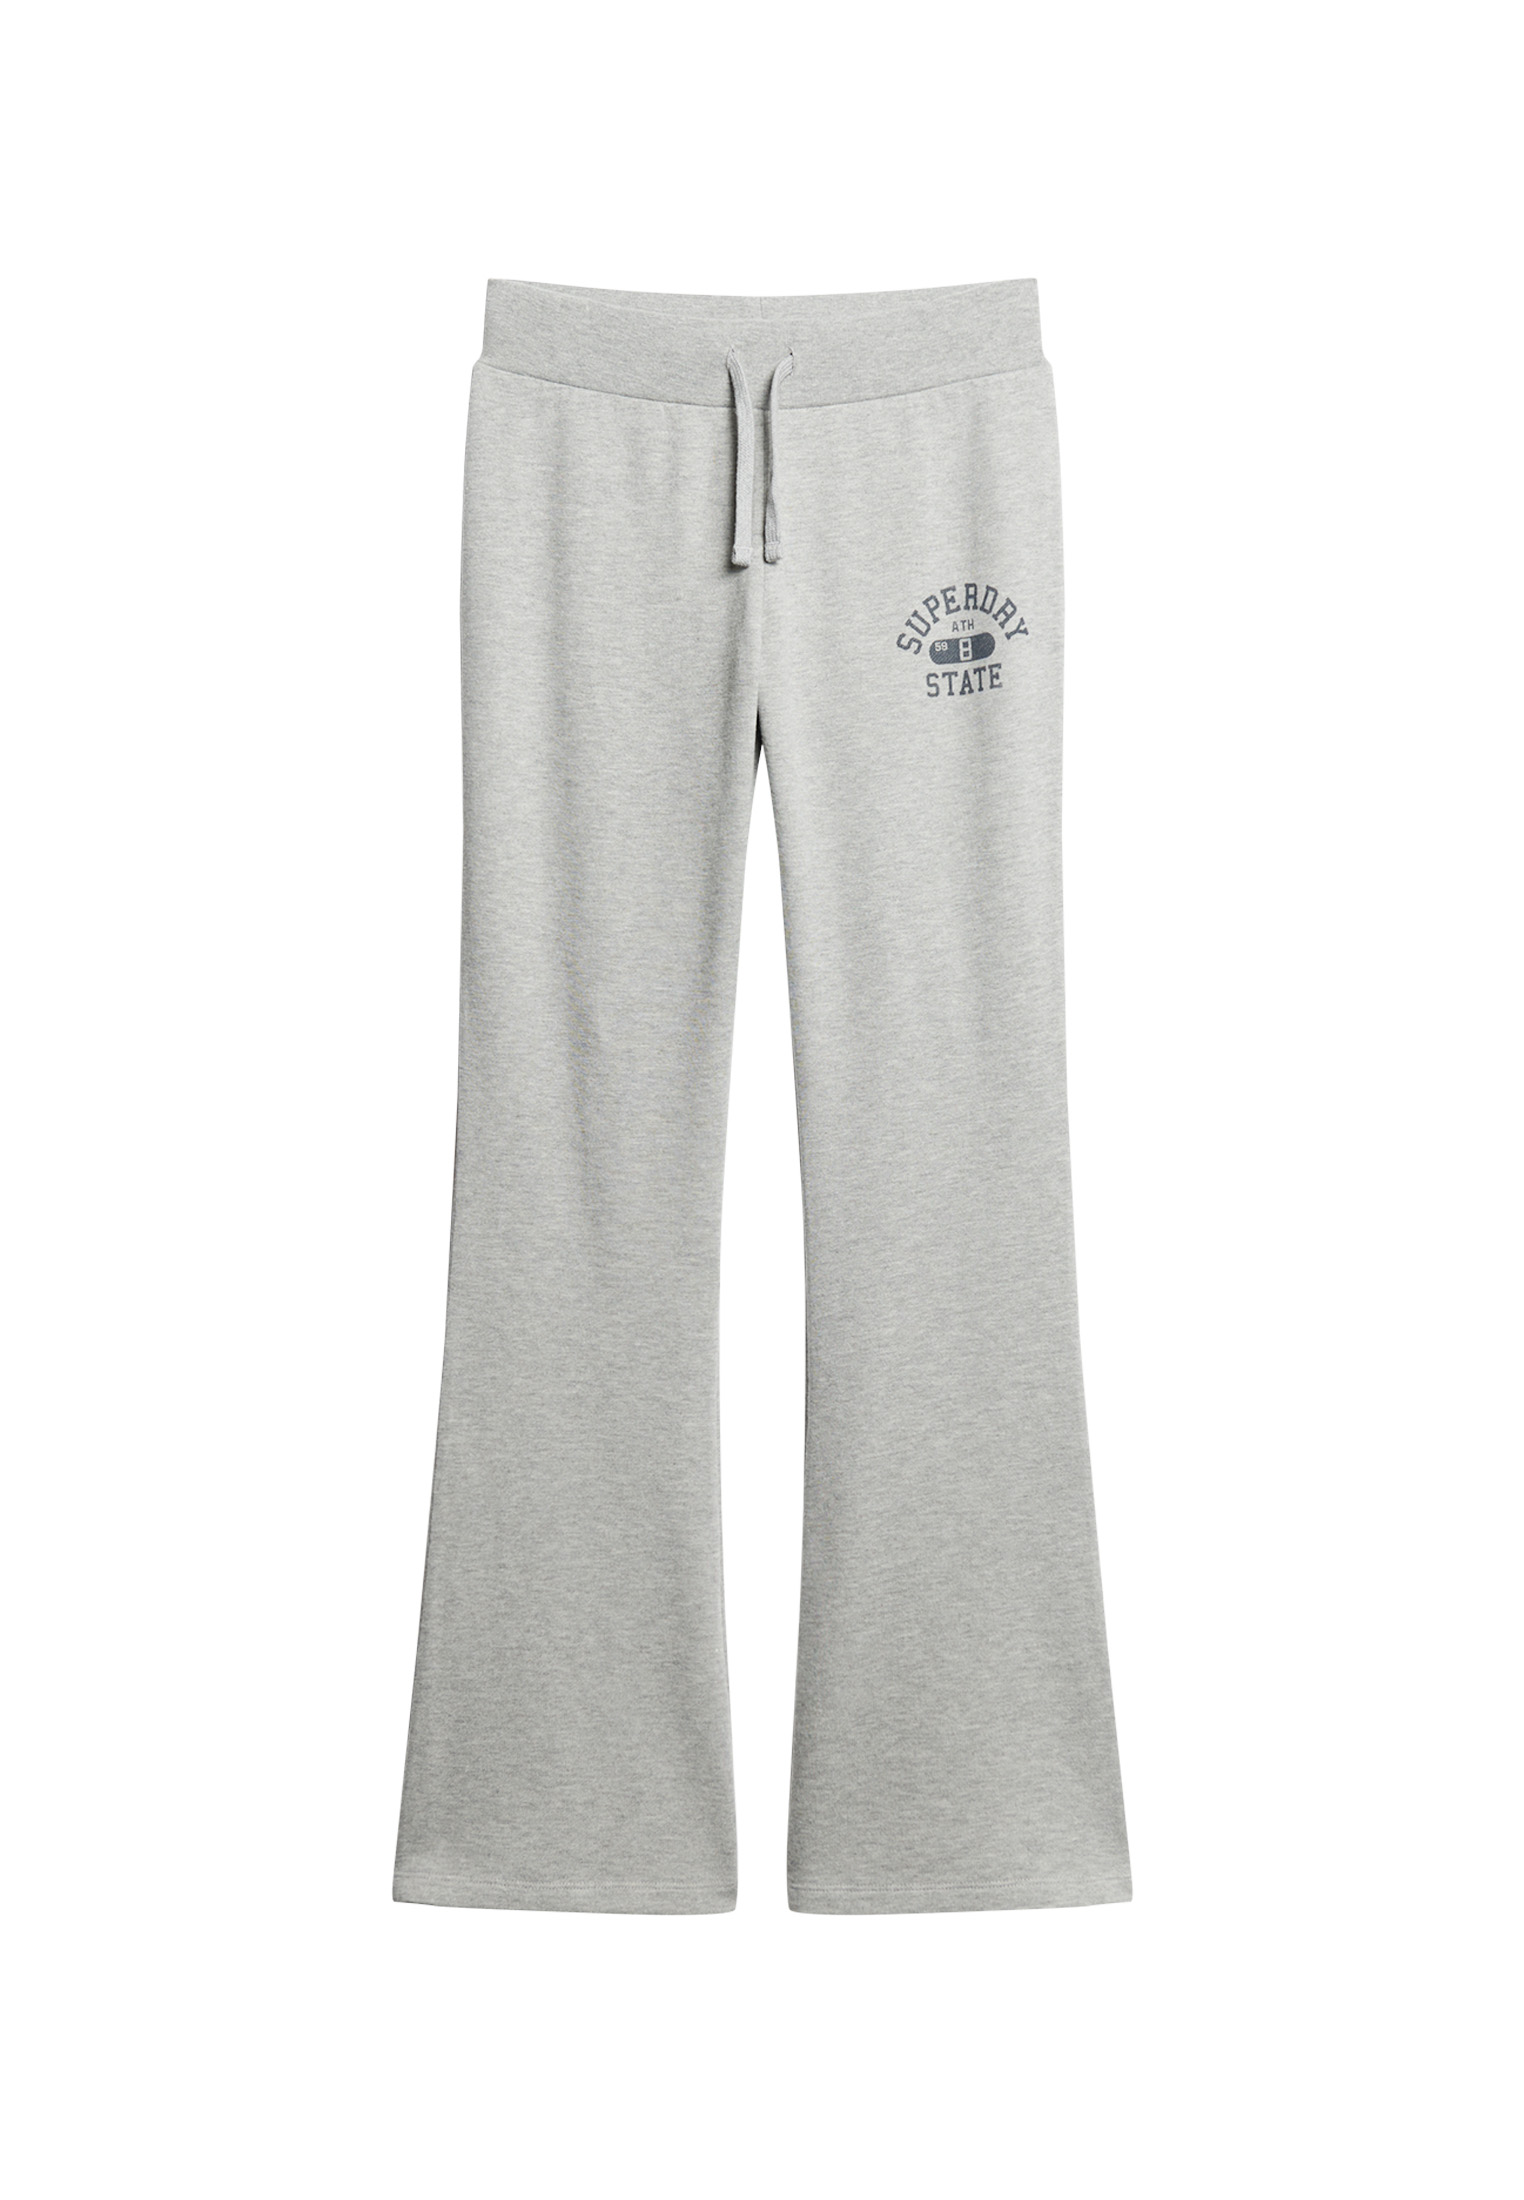 Womens - Athletic Essential Jersey Flare Joggers in Blueberry Navy